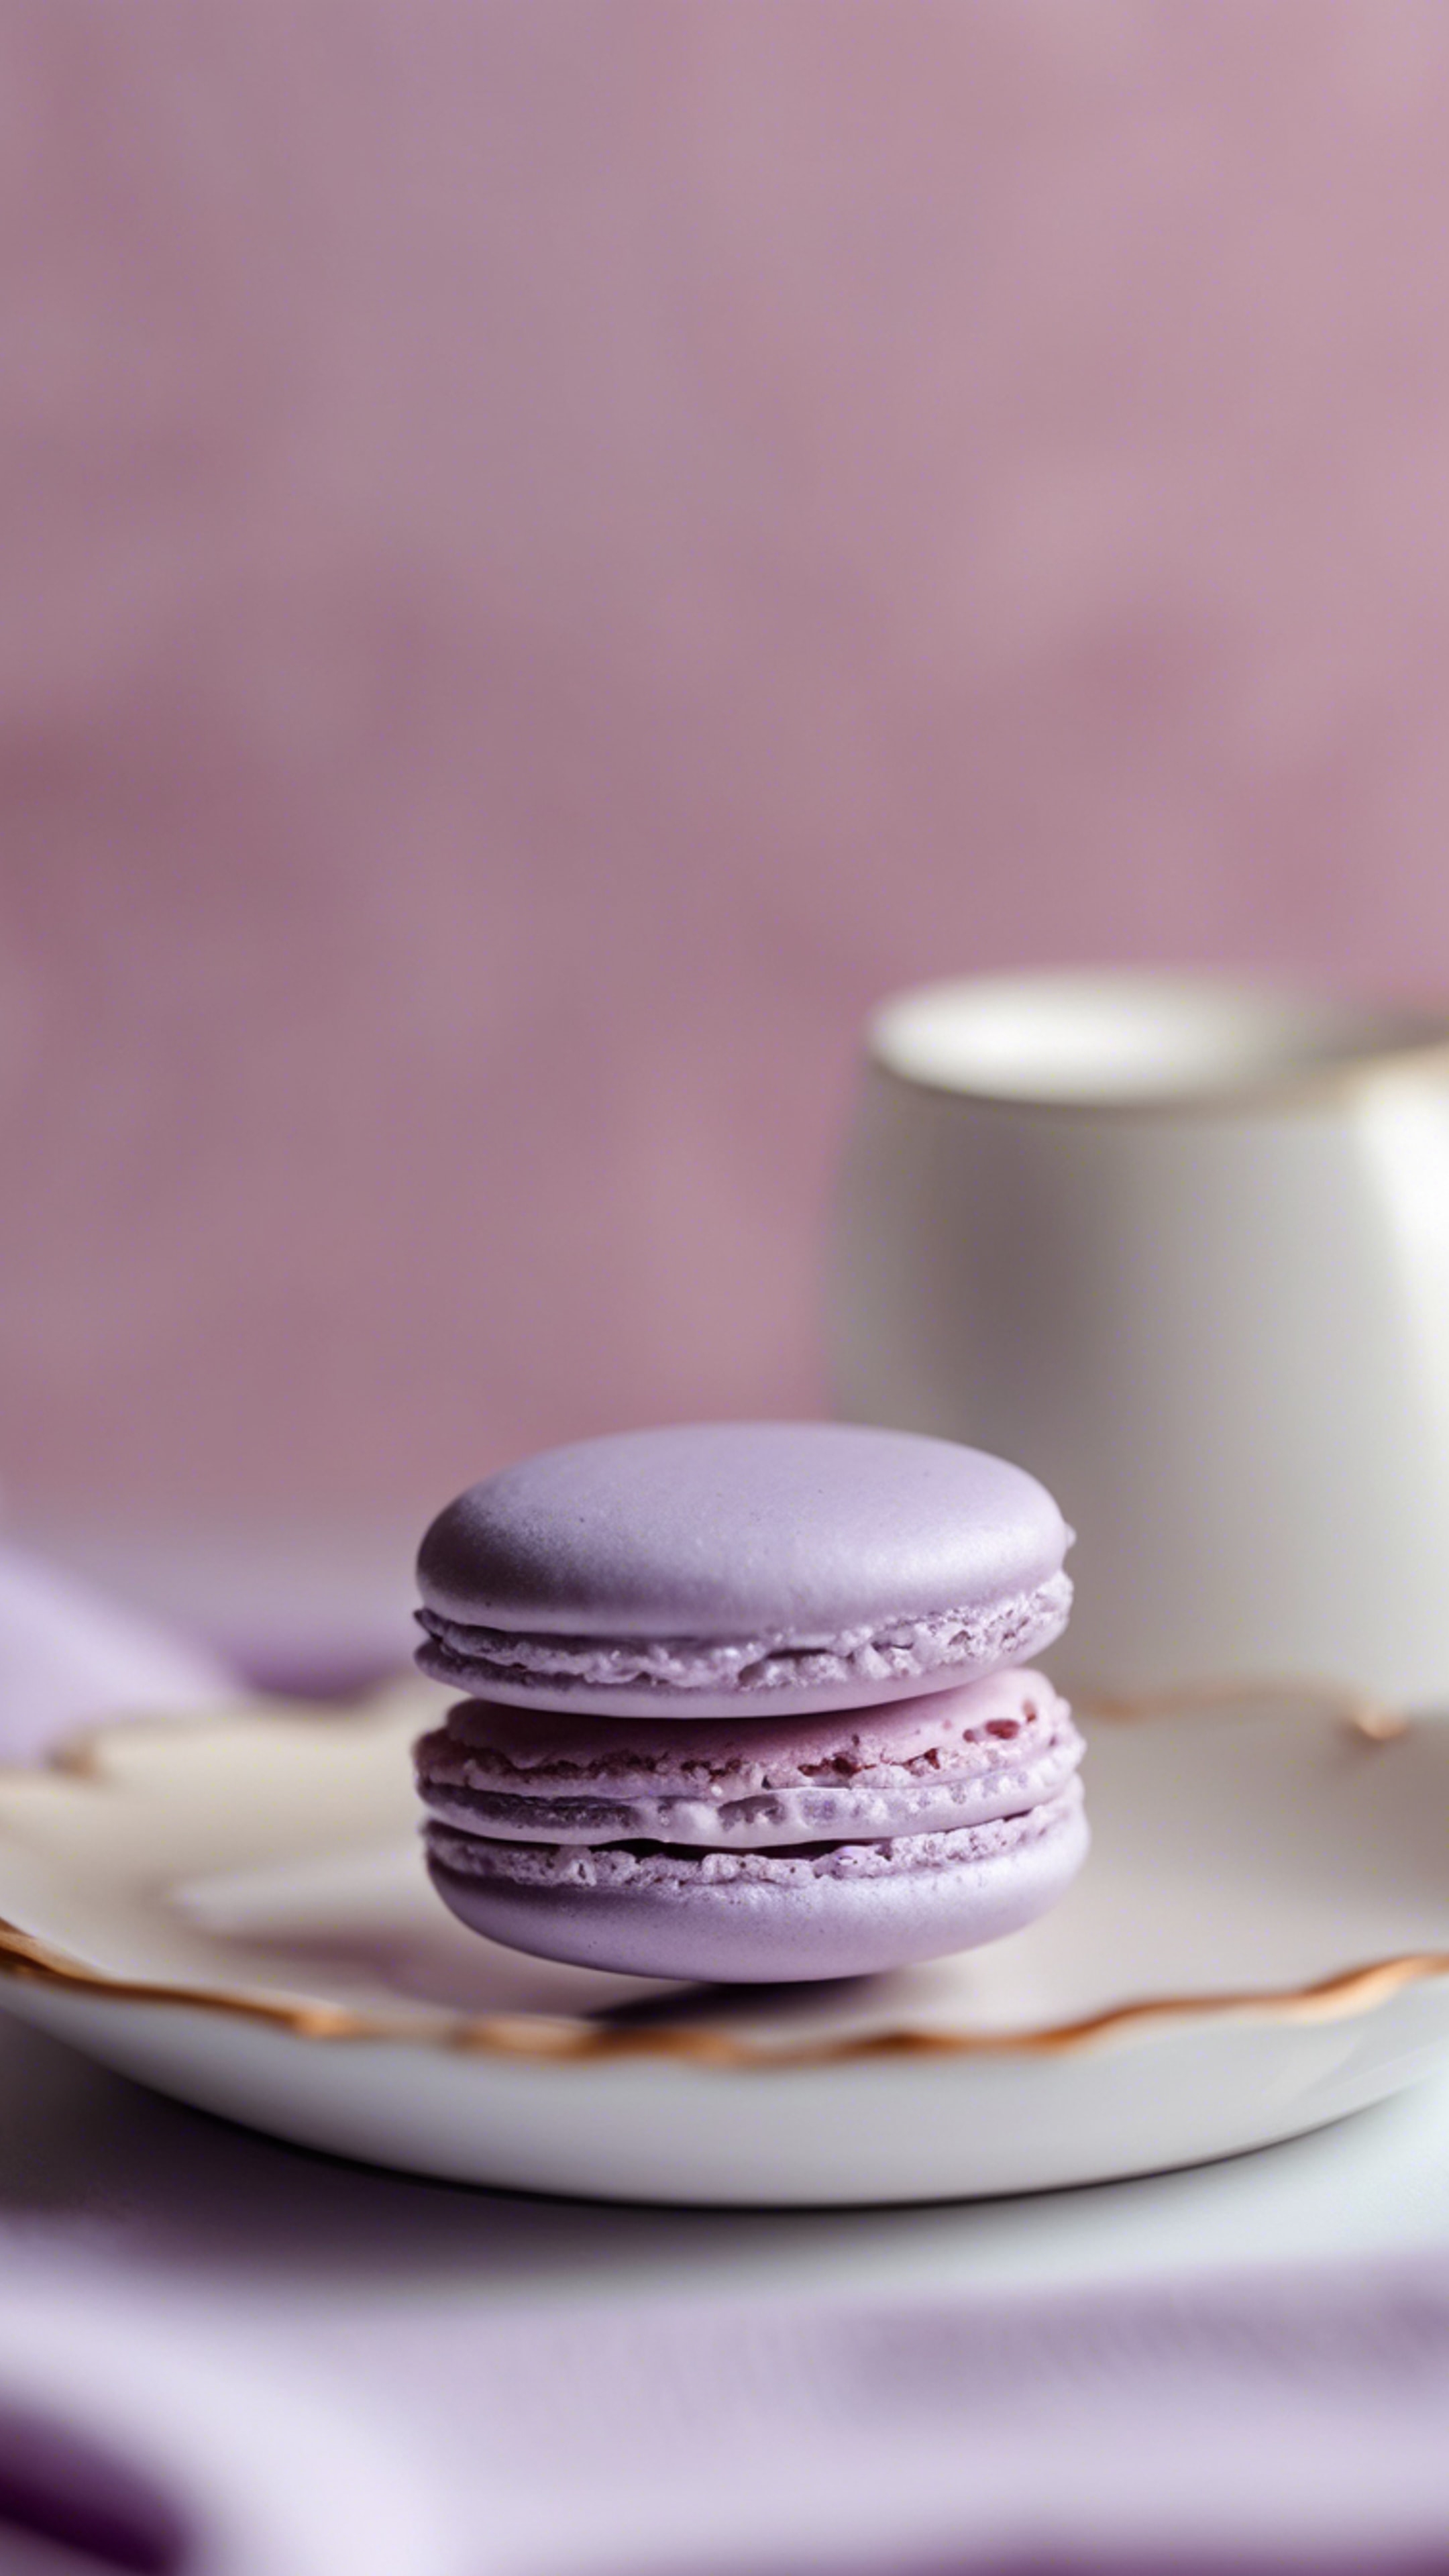 A close-up of a pastel purple-hued french macaron on a white porcelain plate. Taustakuva[867427dfb4584ec3b53c]